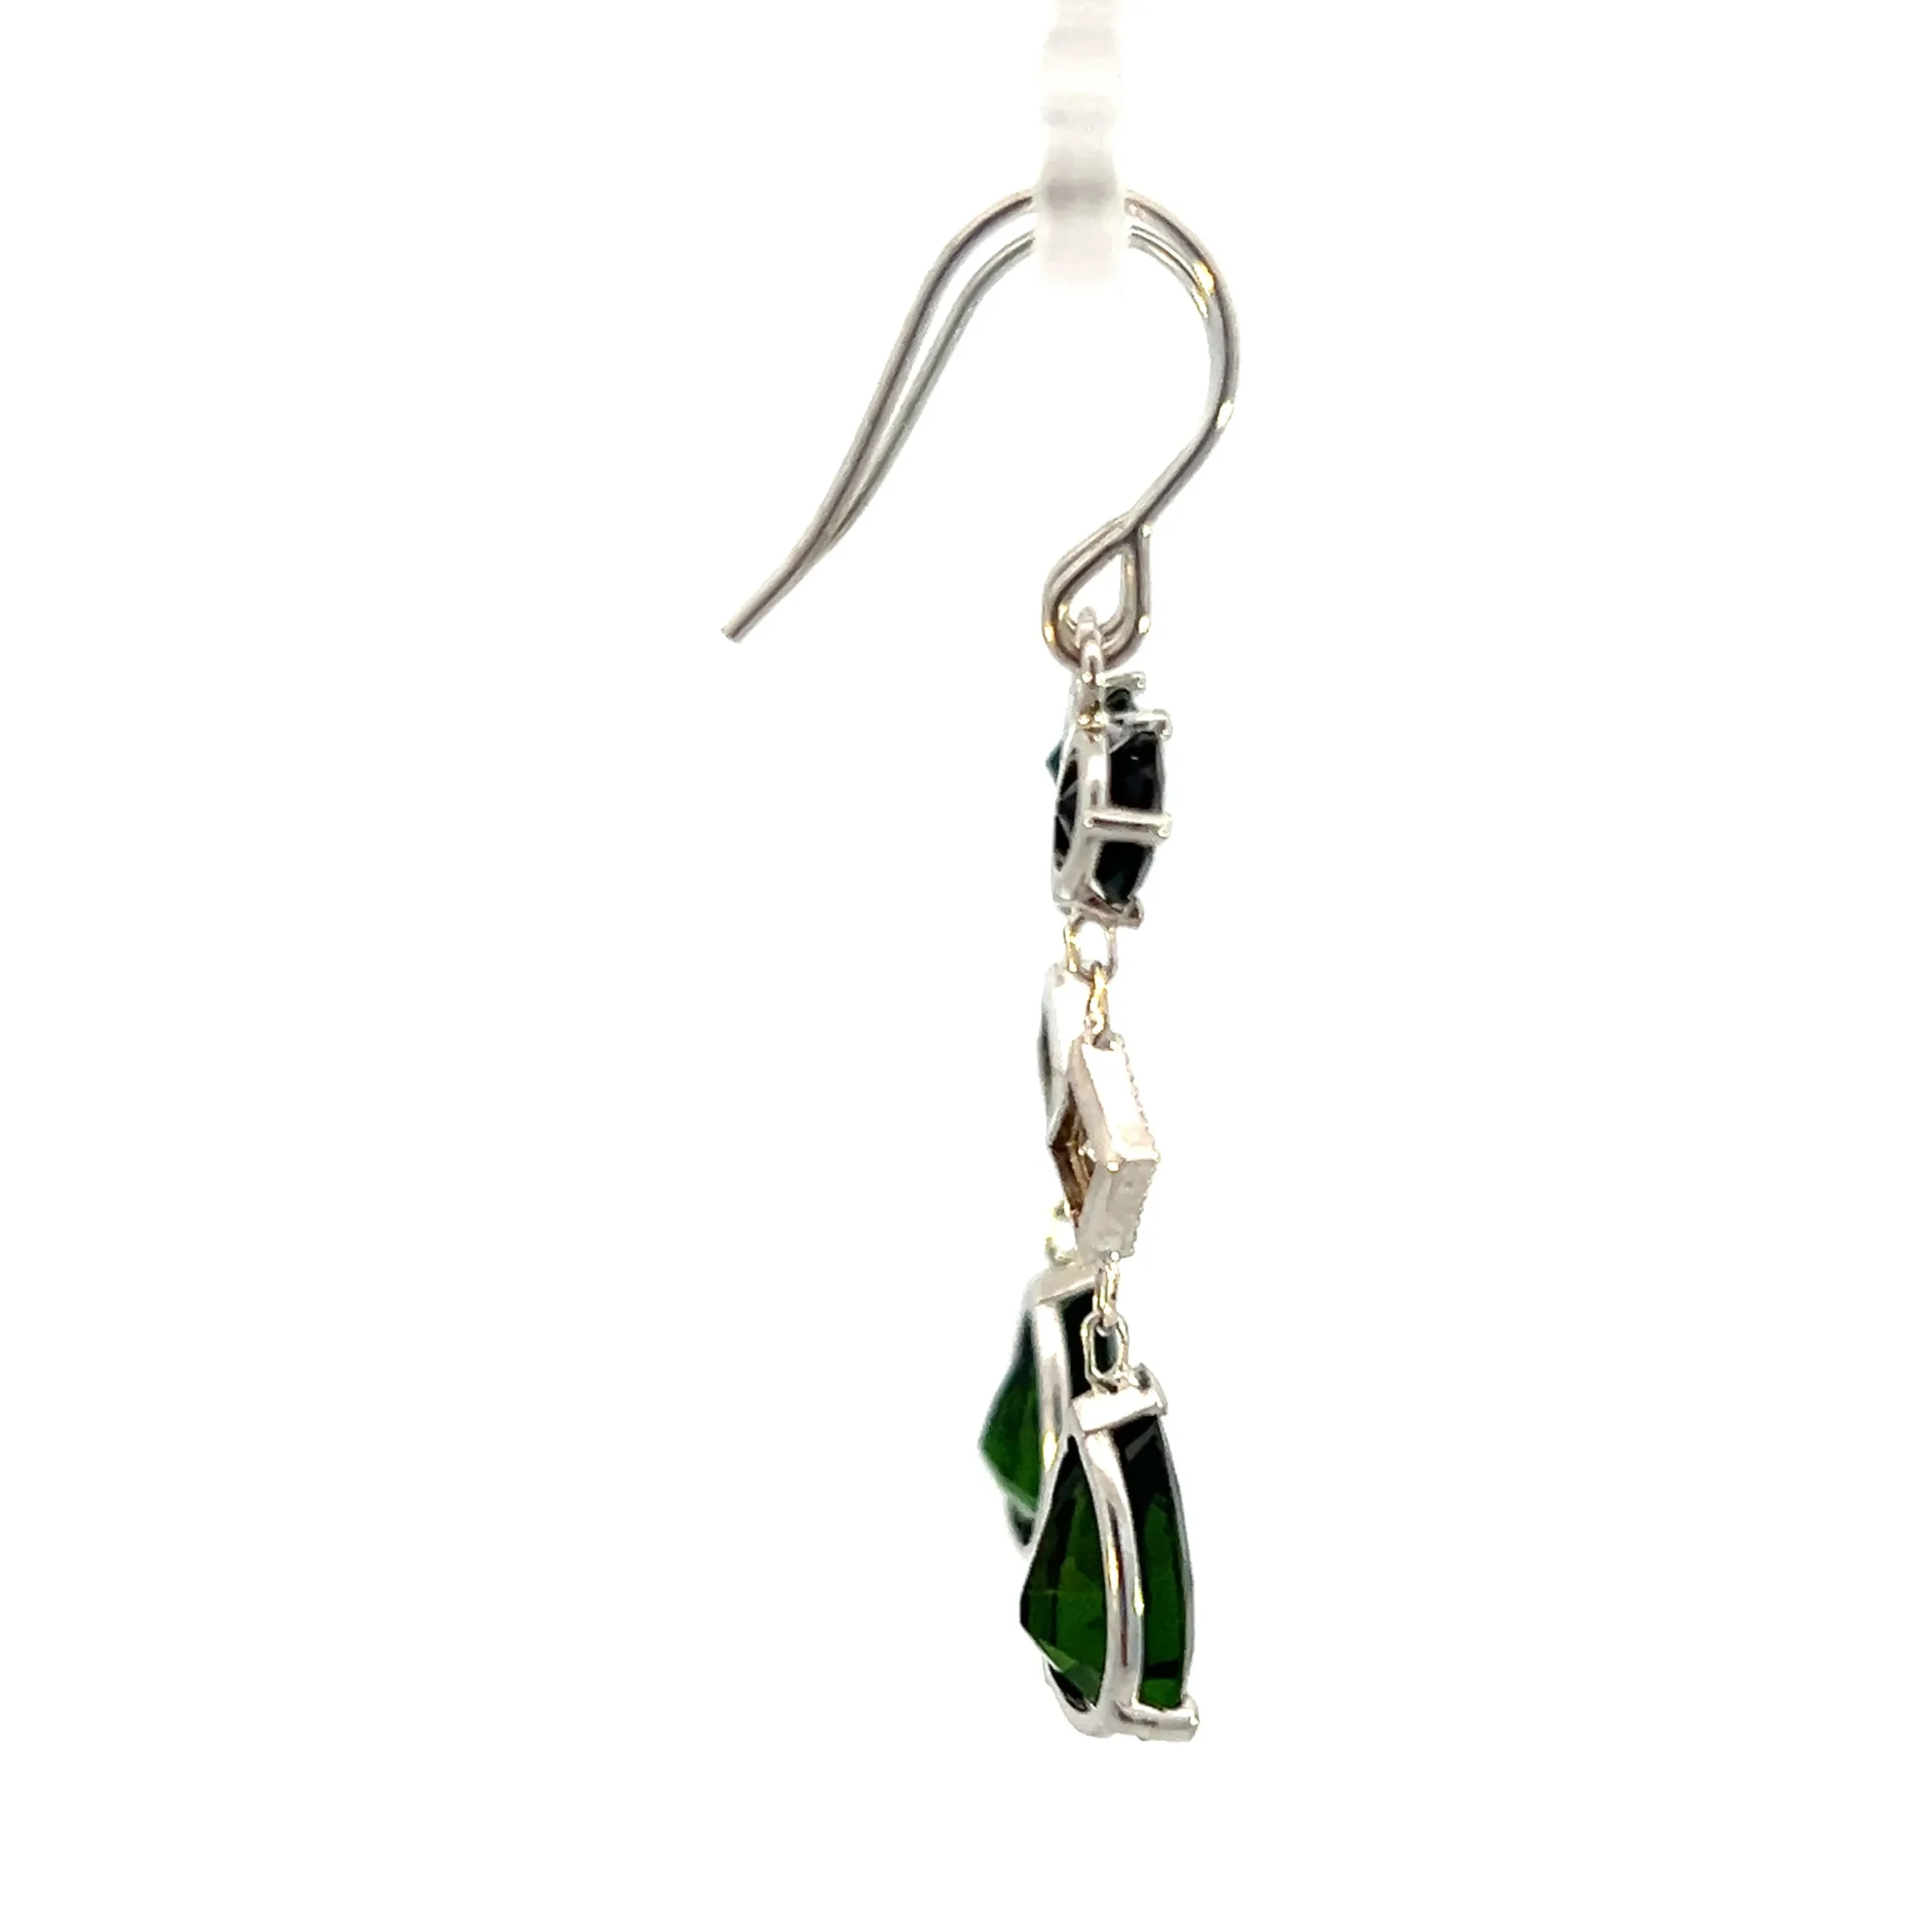 One pair of estate 14 karat white gold drop earrings. Each earrings contains a 5mm round green tourmaline that drops to a milgrain-accented diamond-shaped setting with a round brilliant diamonds that drops to a 9x7mm pear-shaped green tourmaline.